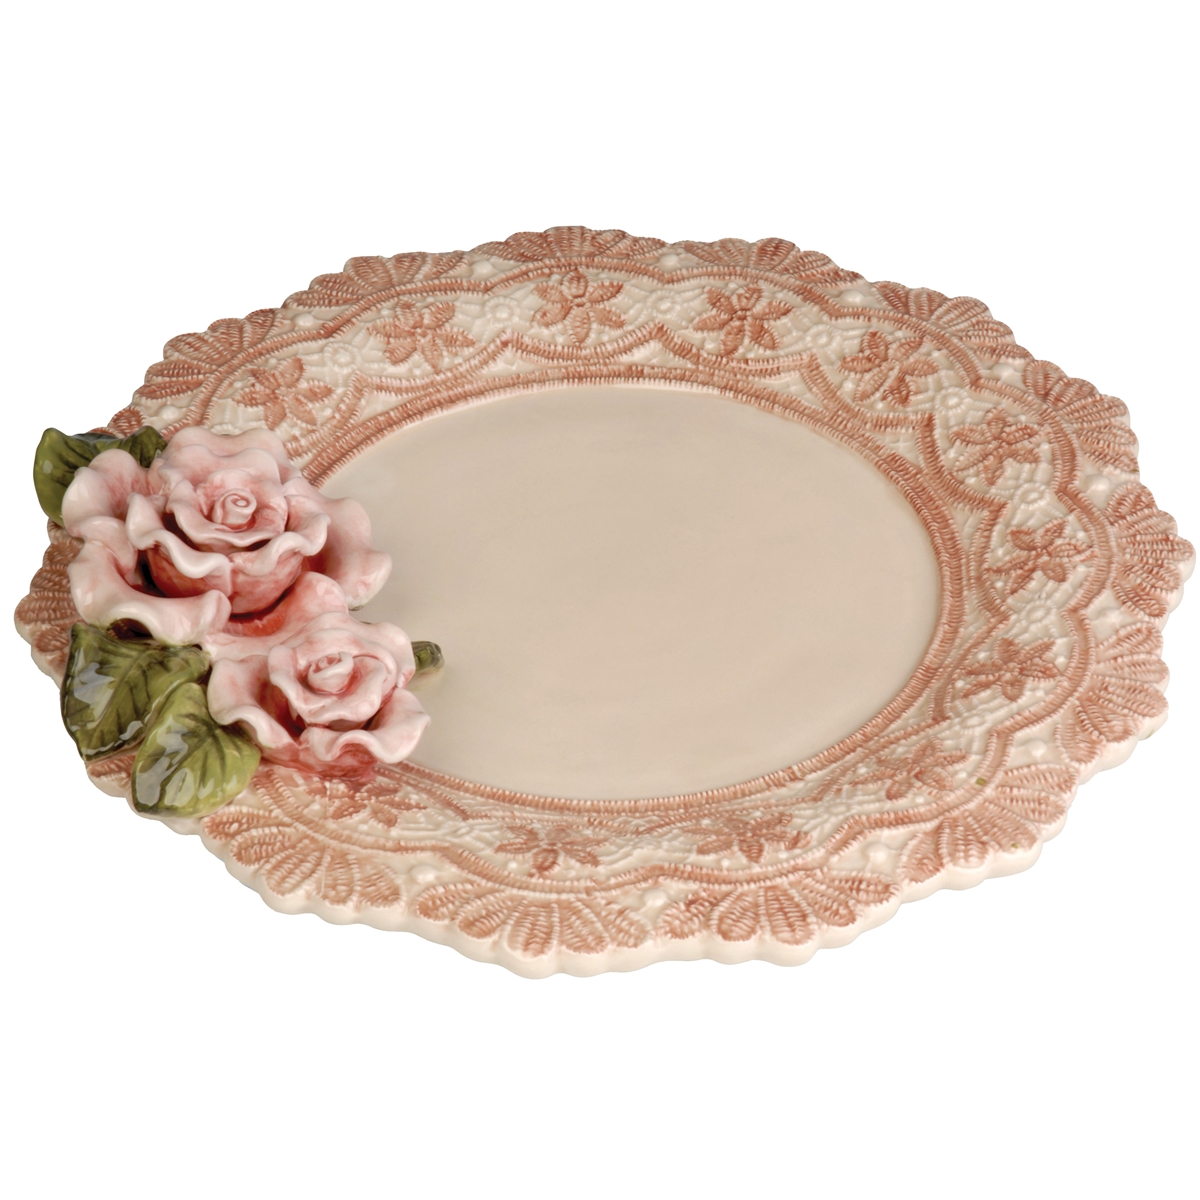 Rose Lace Plate by Kaldun and Bogle